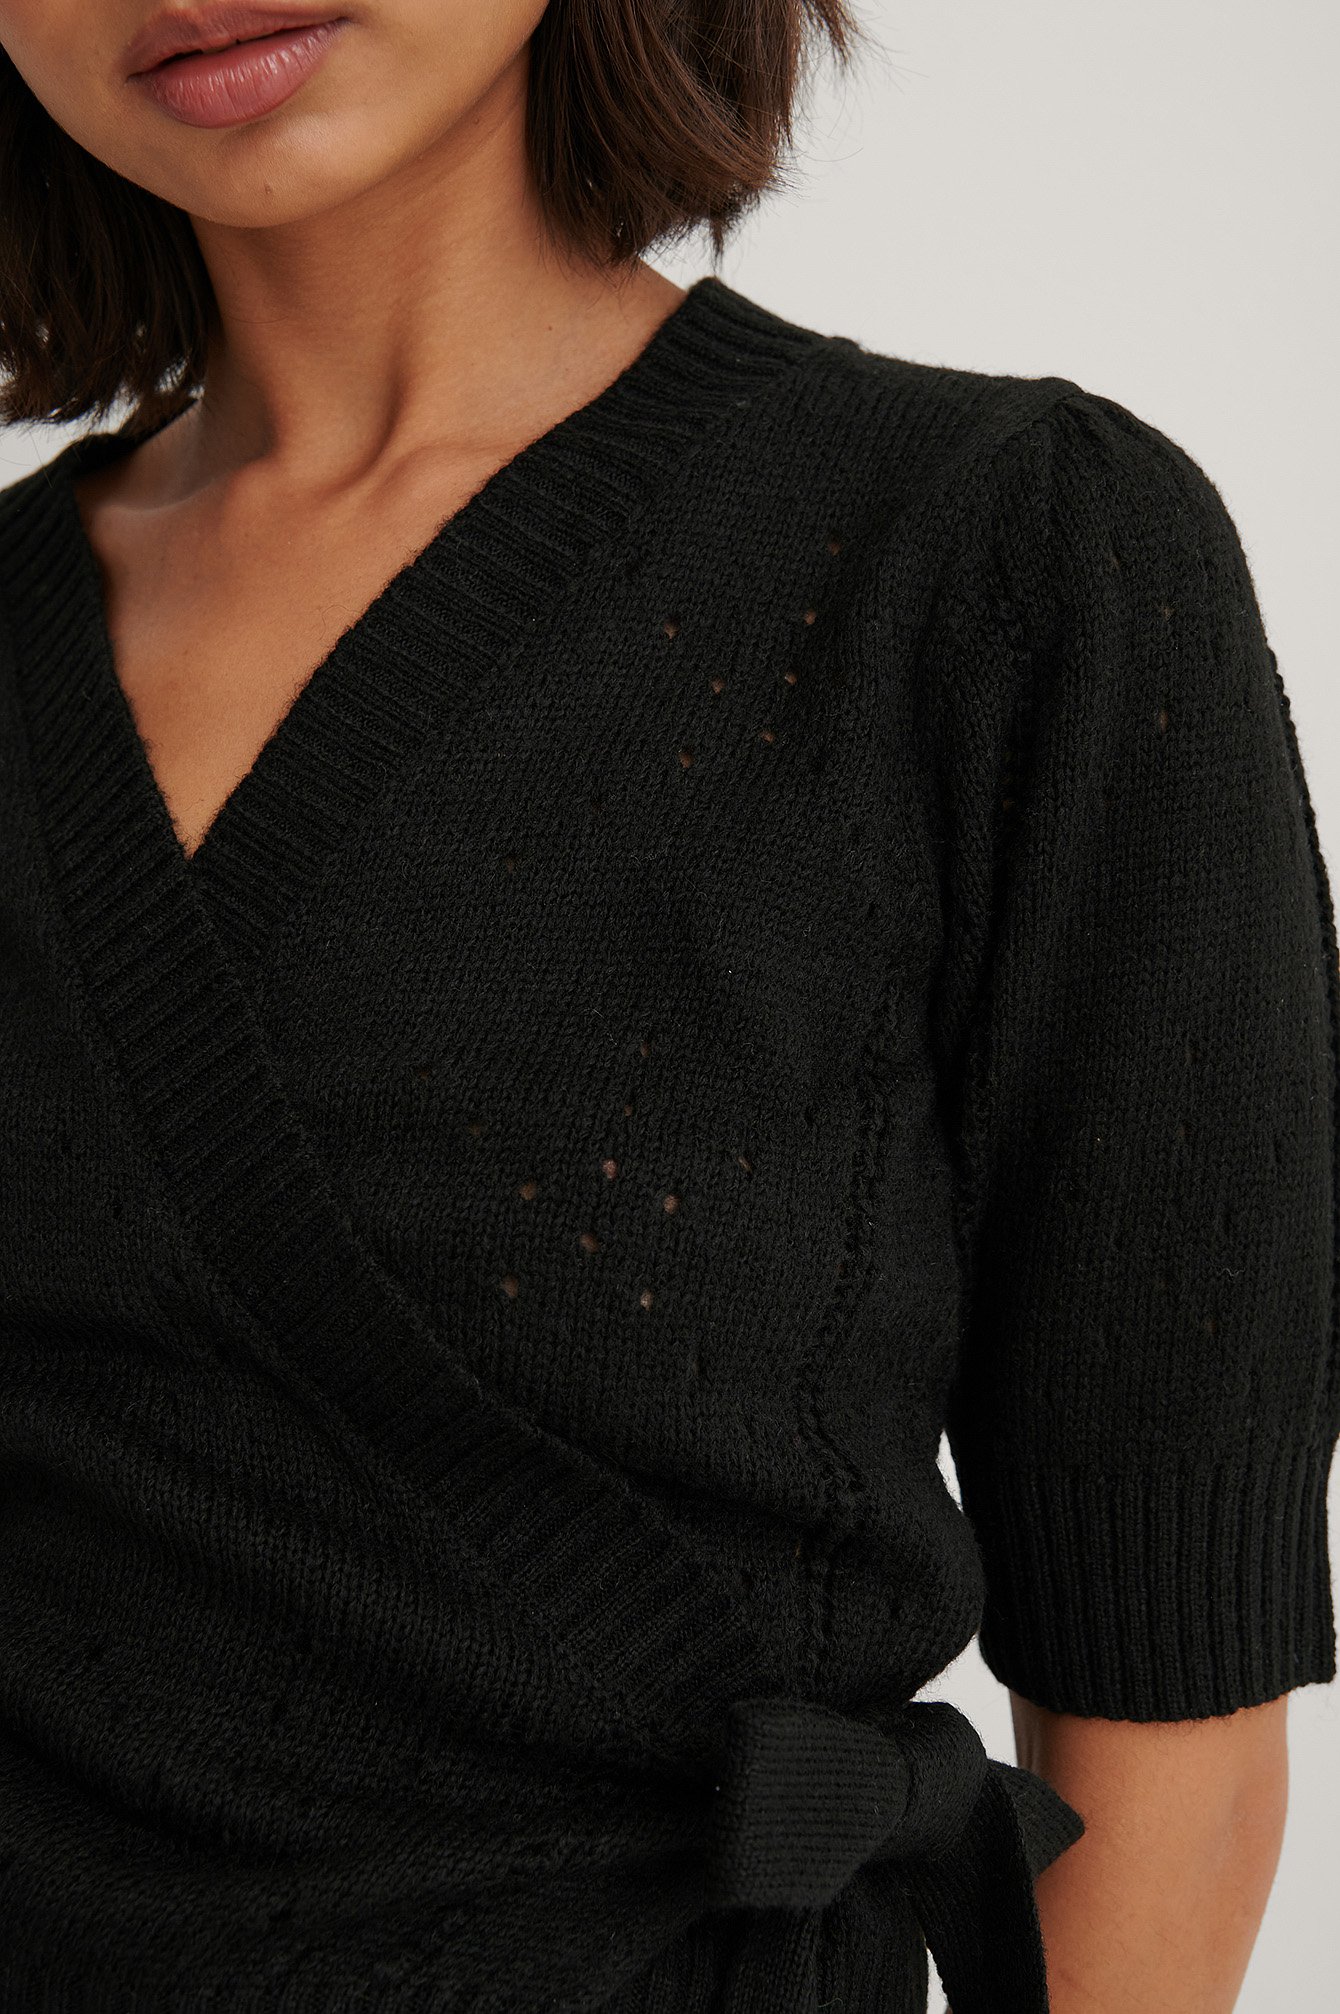 Black Overlap Pattern Knitted Sweater